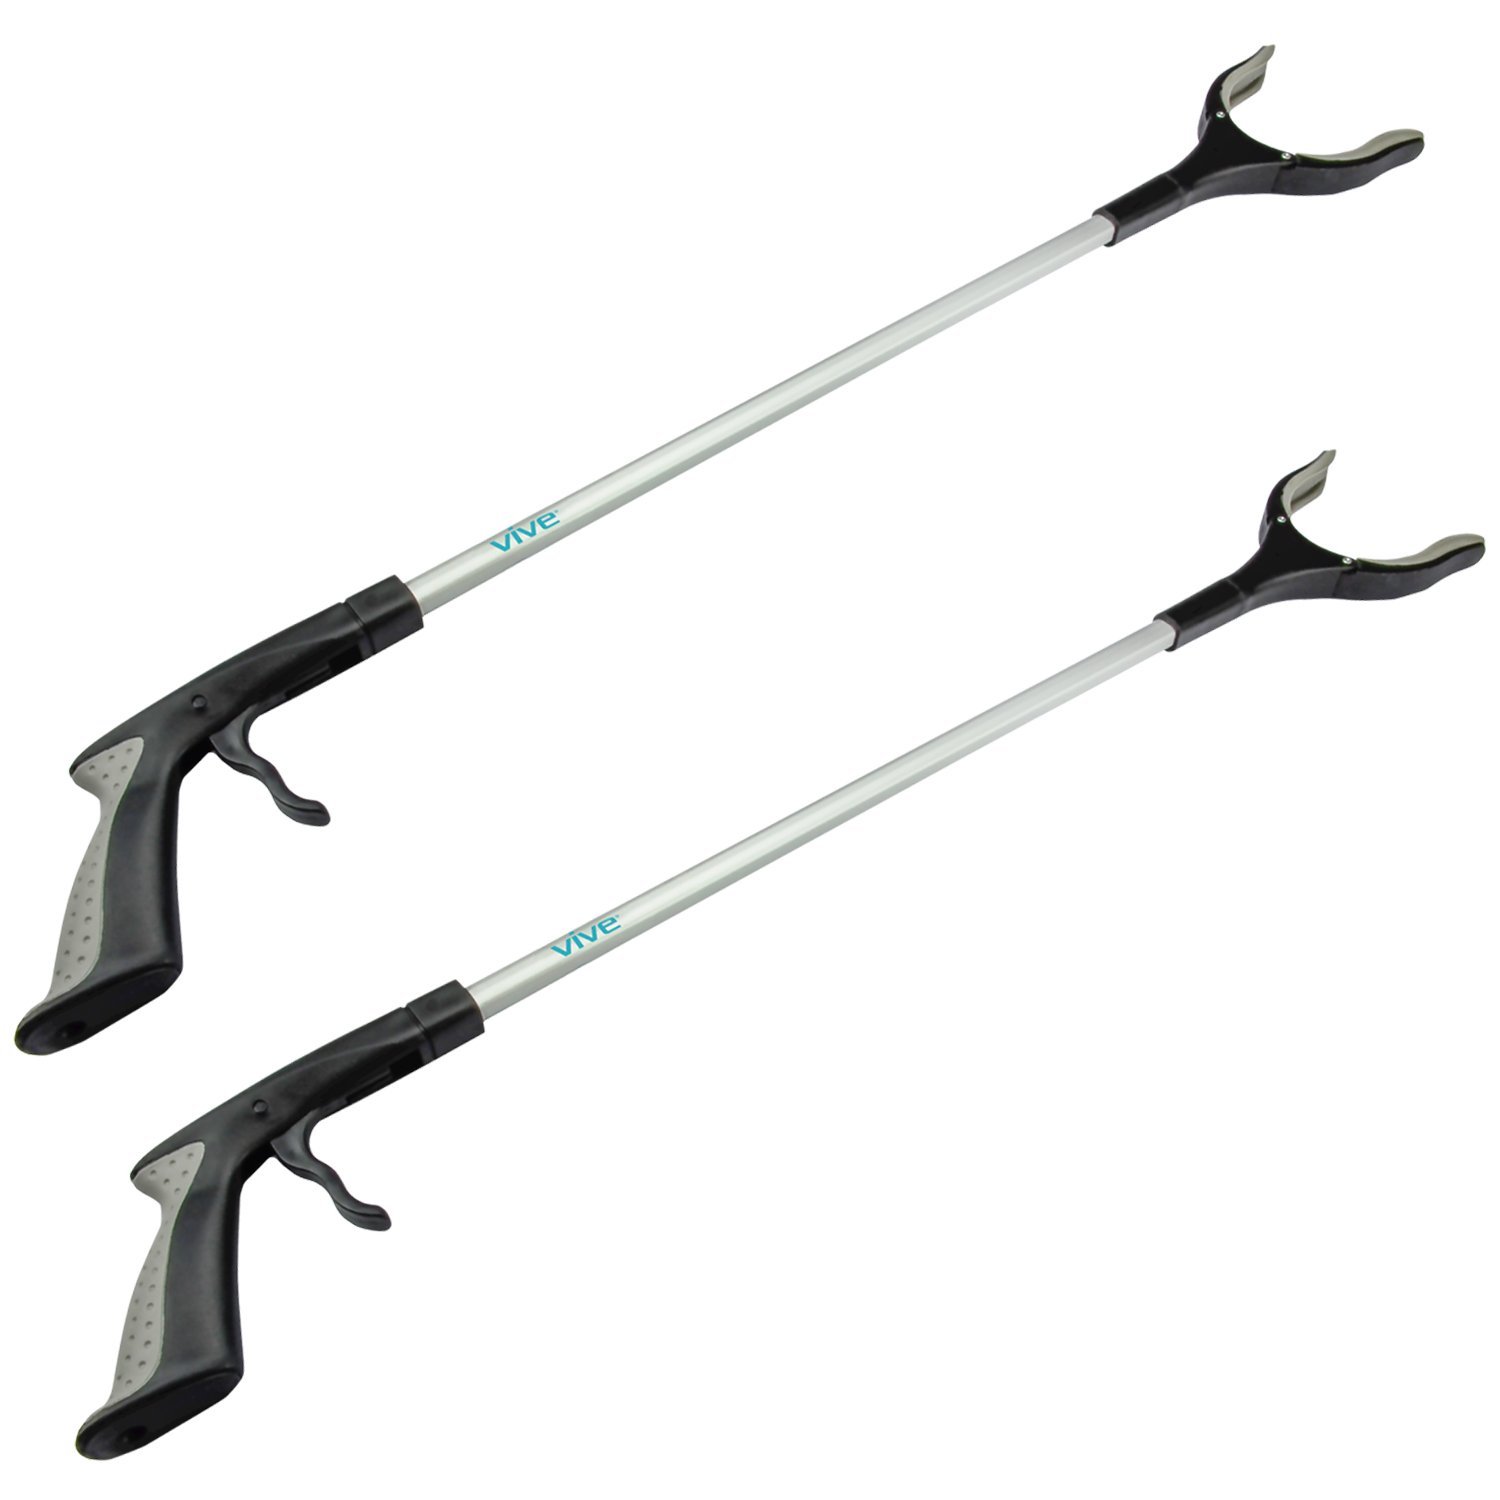 What's The Best Reacher Grabber Tool for You? - Vive Health